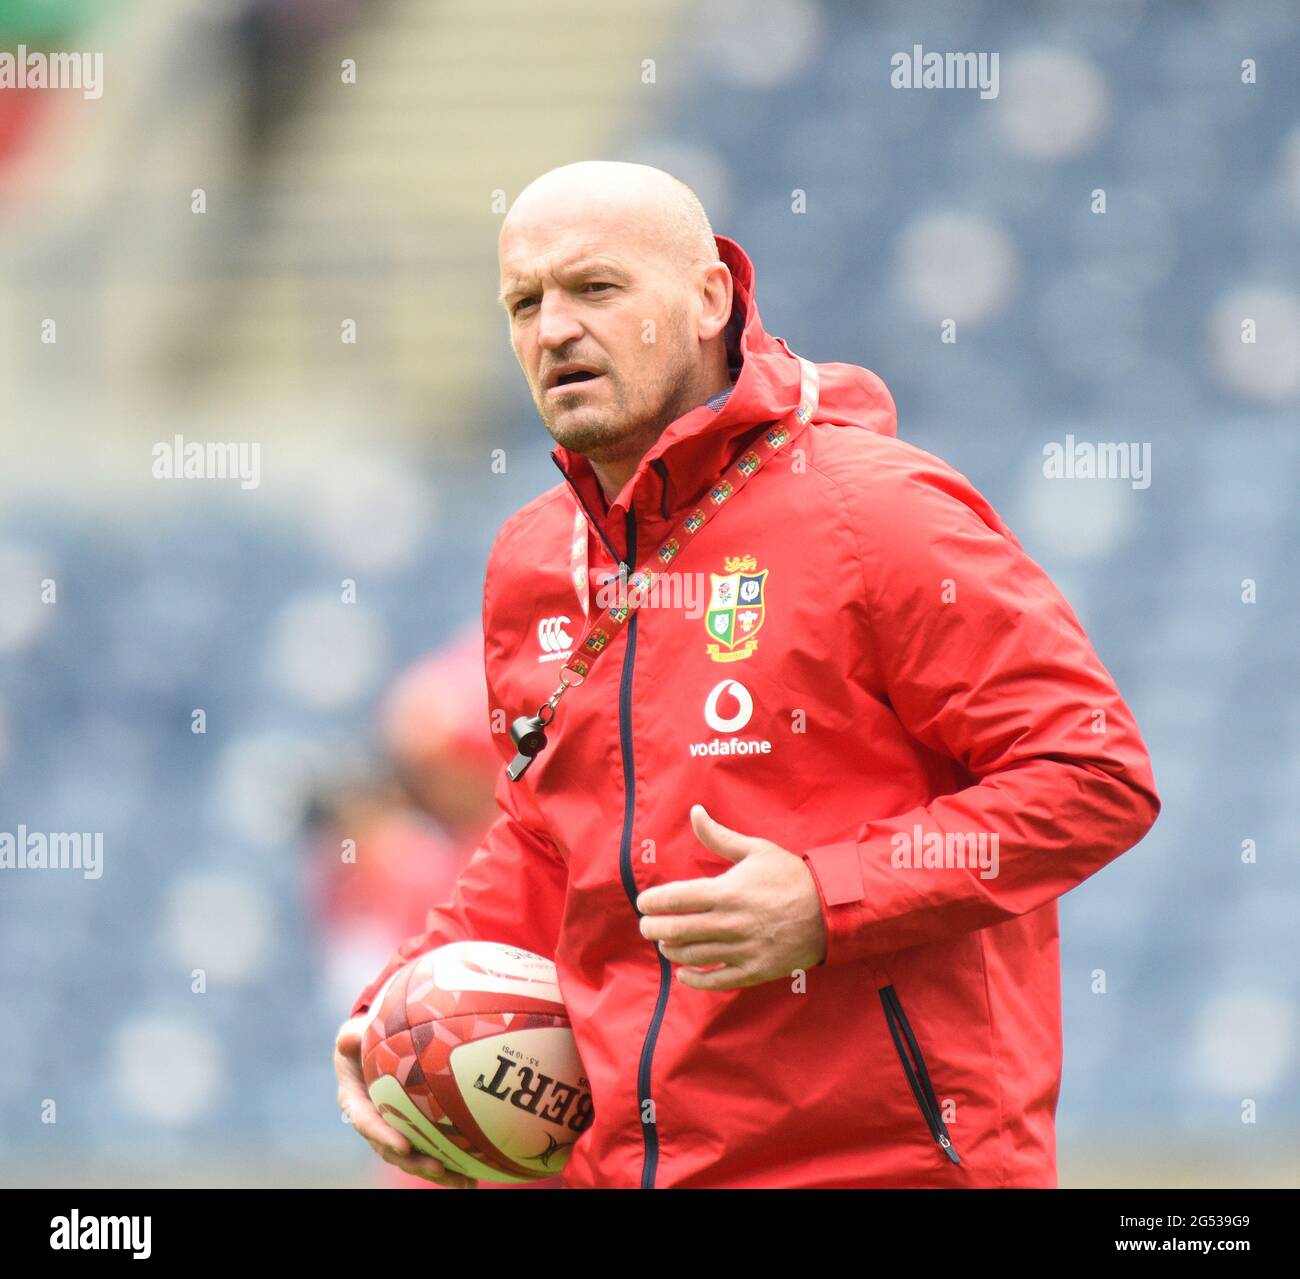 BT Murrayfield .Edinburgh.Scotland UK. 25th June-21 British & Irish Lions Training Session for Japan Match Attack Coach Gregor Townsend pictured during training session. Credit: eric mccowat/Alamy Live News Stock Photo